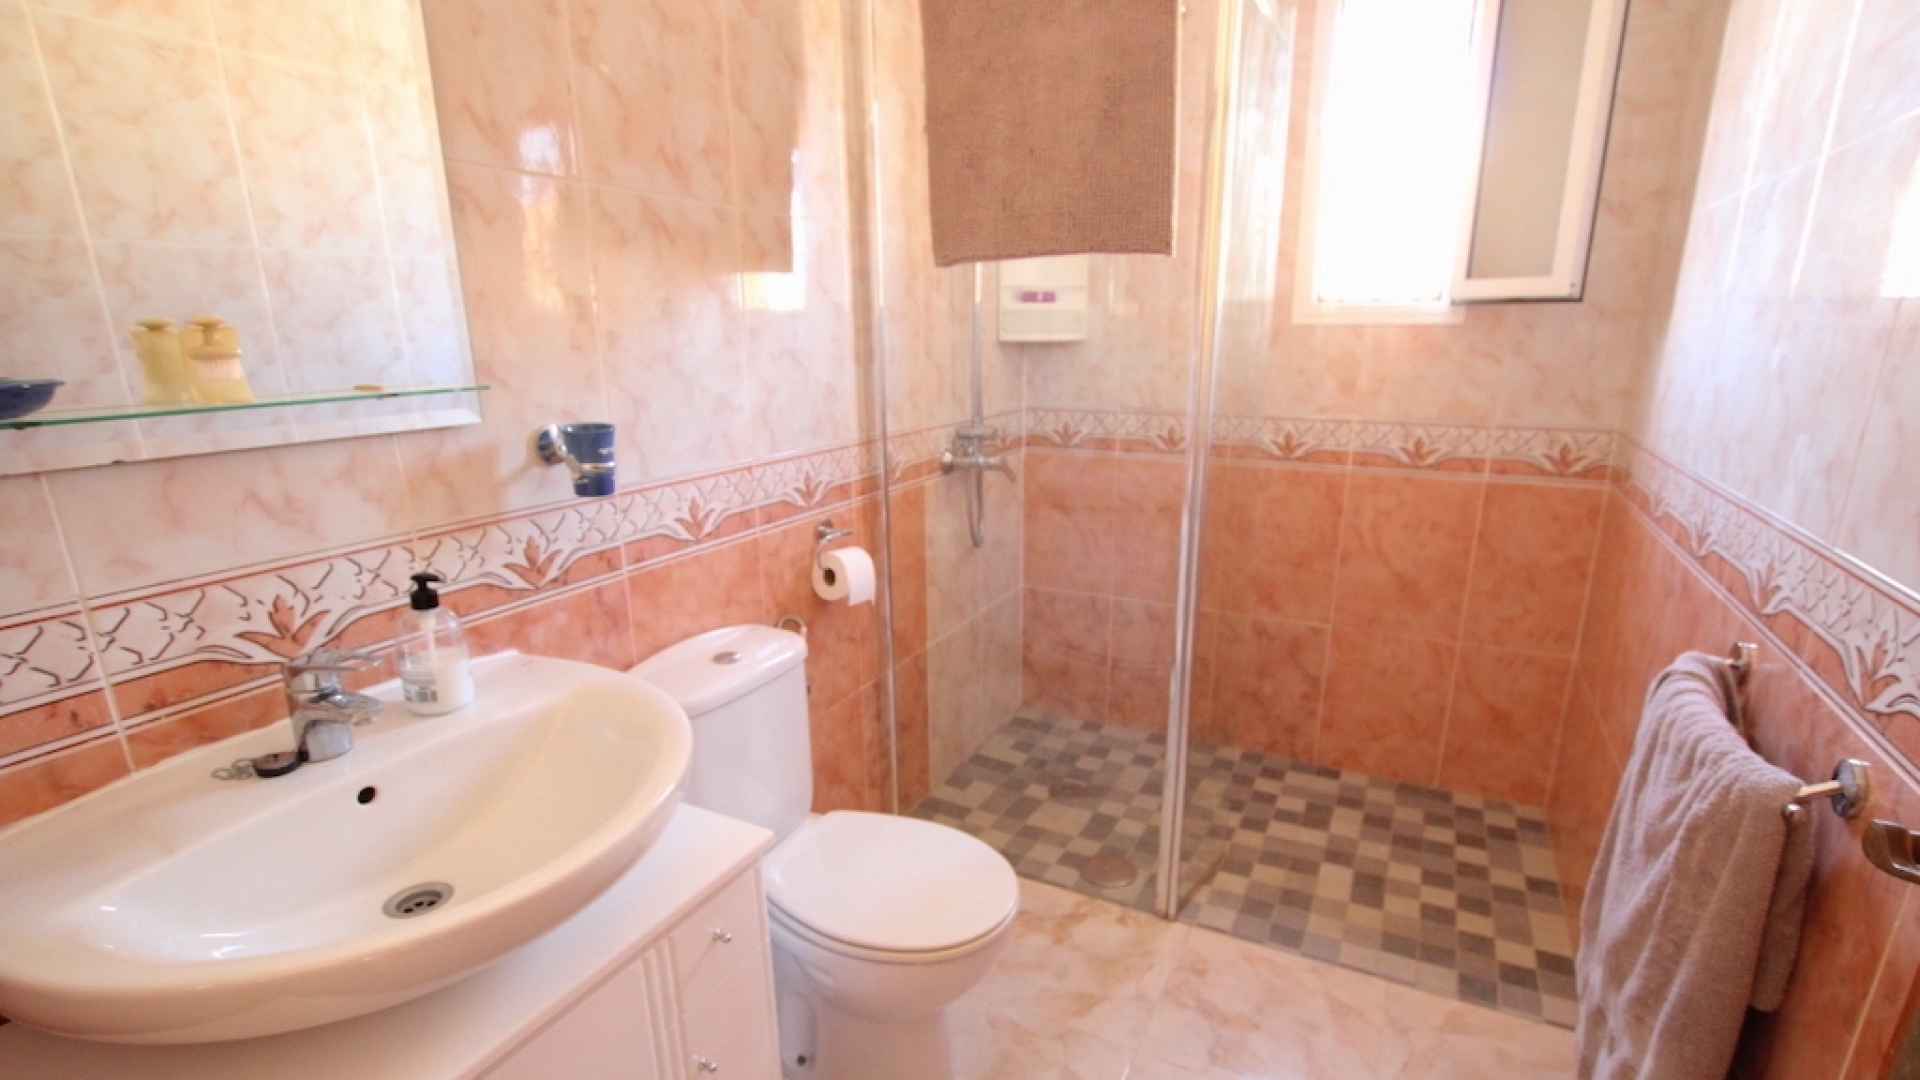 48307_spacious_5_bed_4_bath_dictated_villa_with_private_pool_201223084243_img_1896